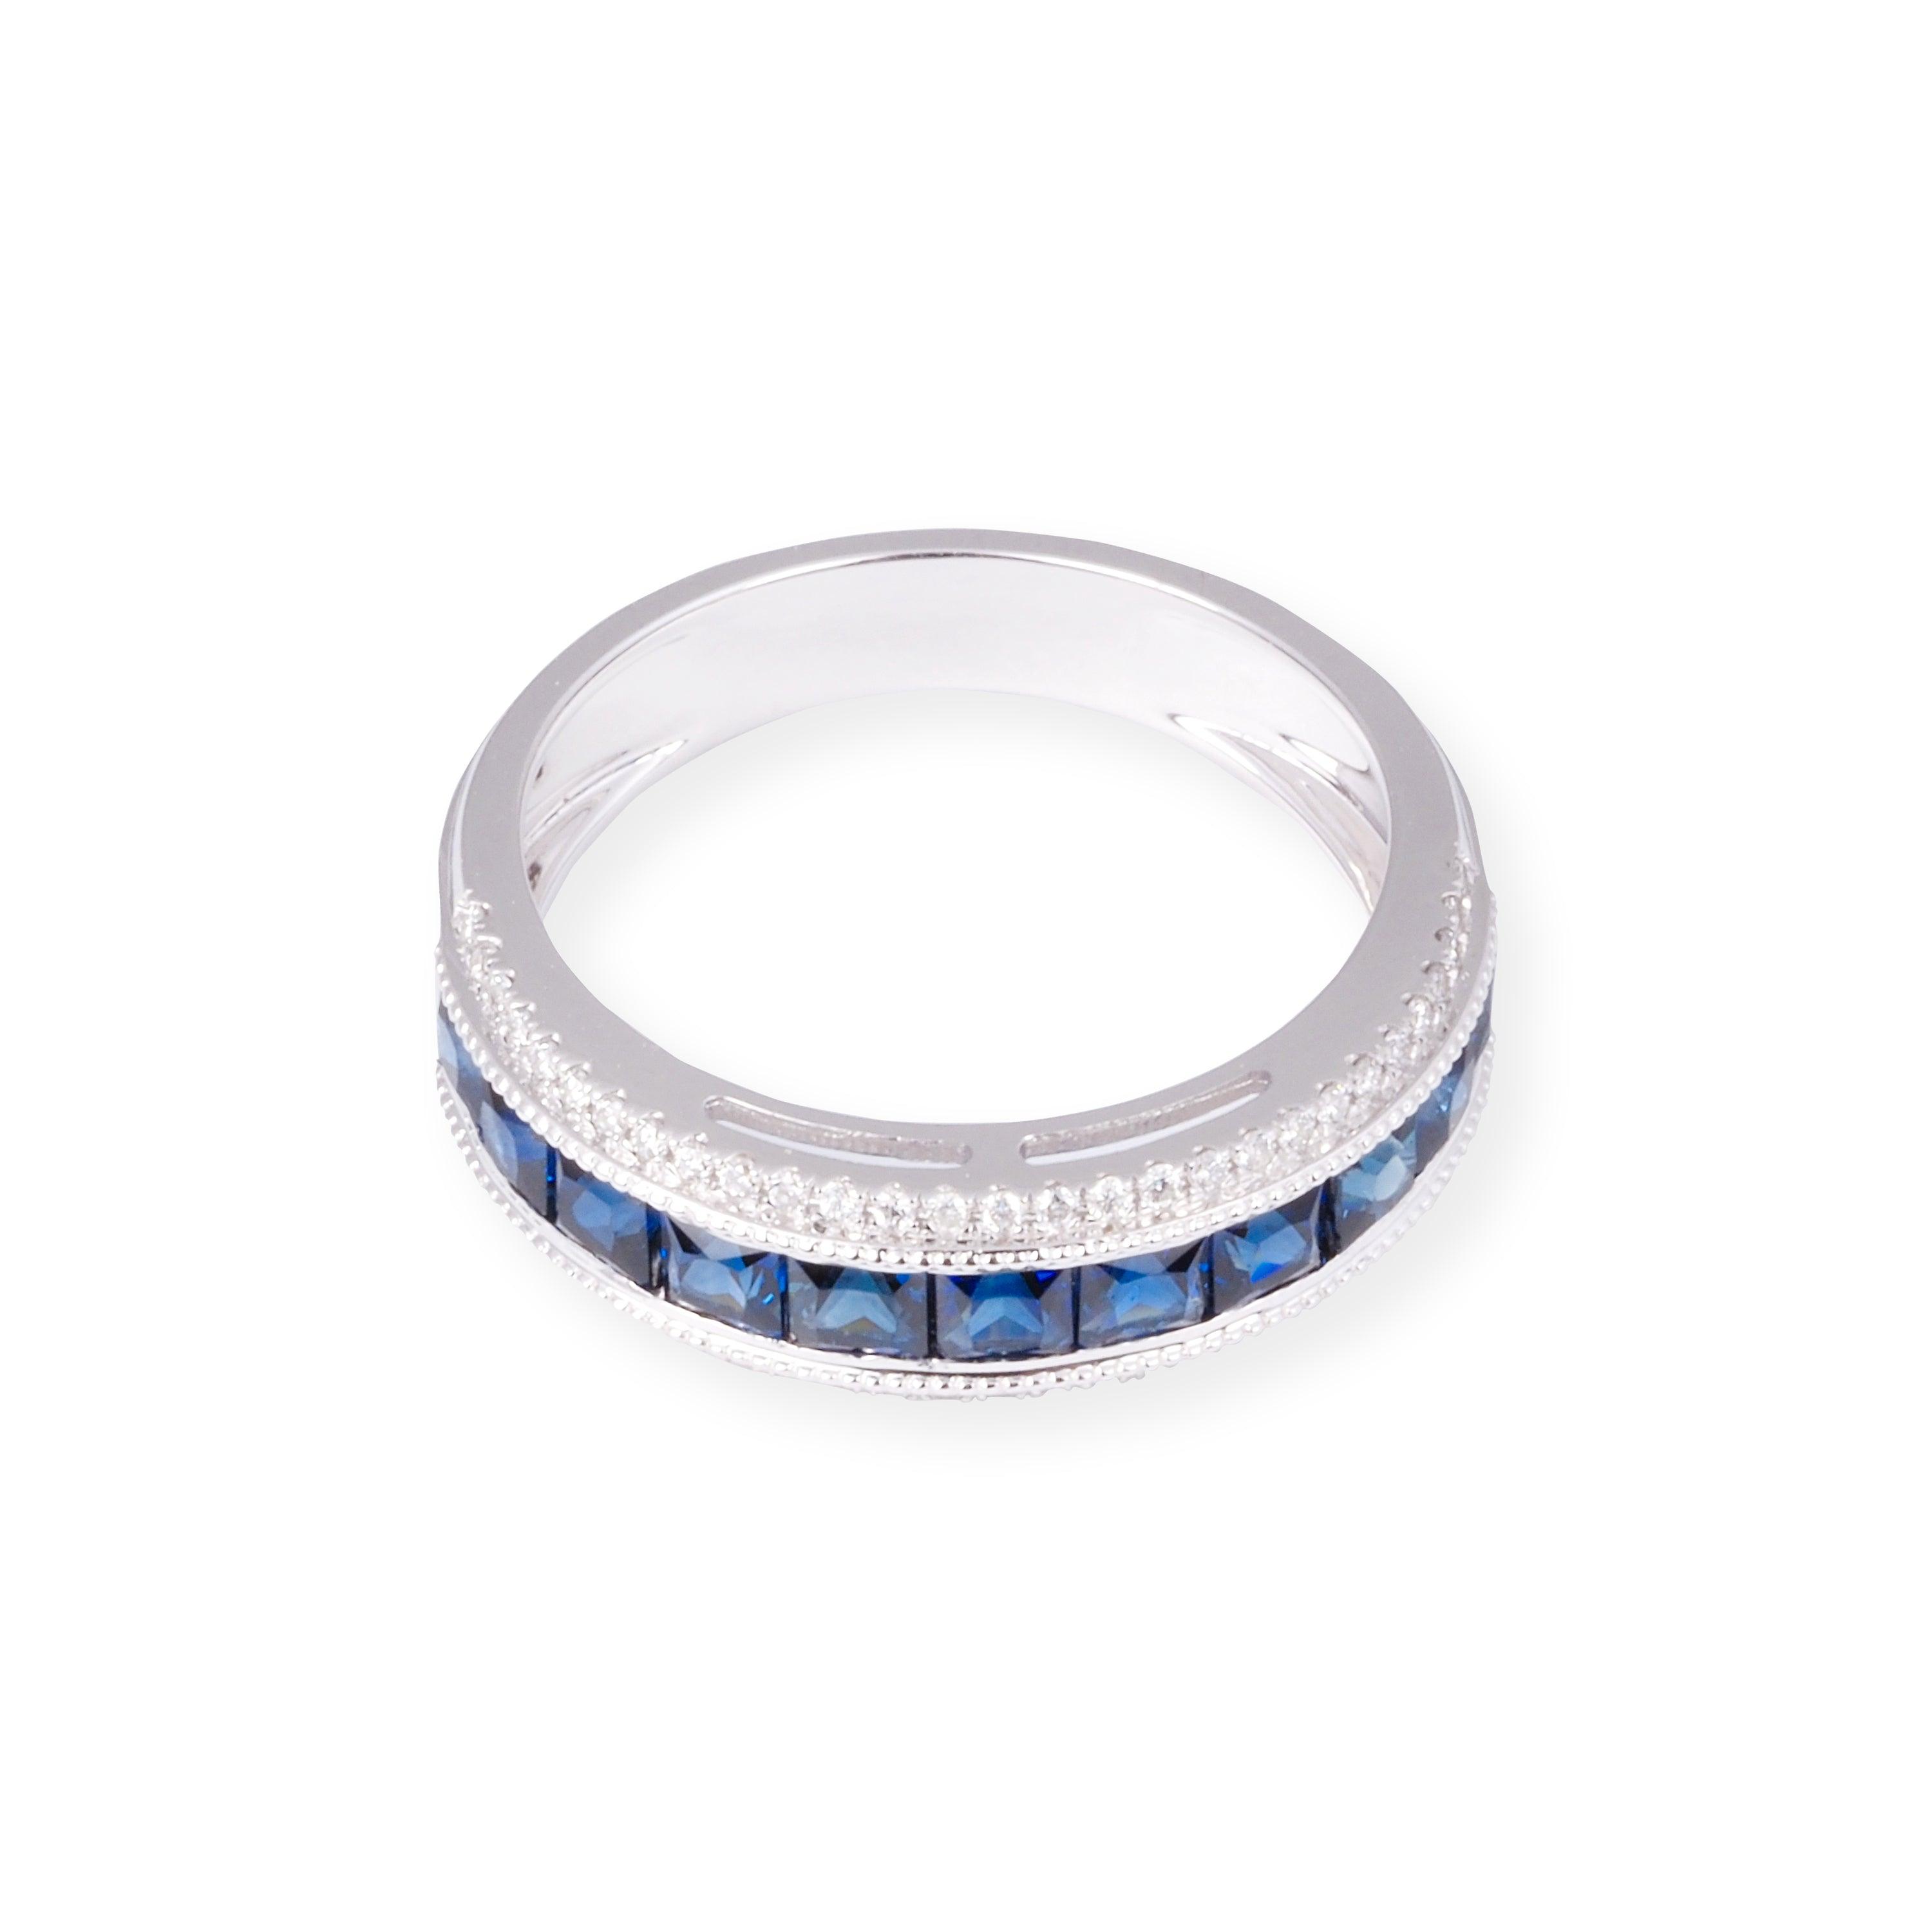 18ct White Gold With Diamonds & Blue Sapphire Ring In Pave Setting LR-7040 - Minar Jewellers